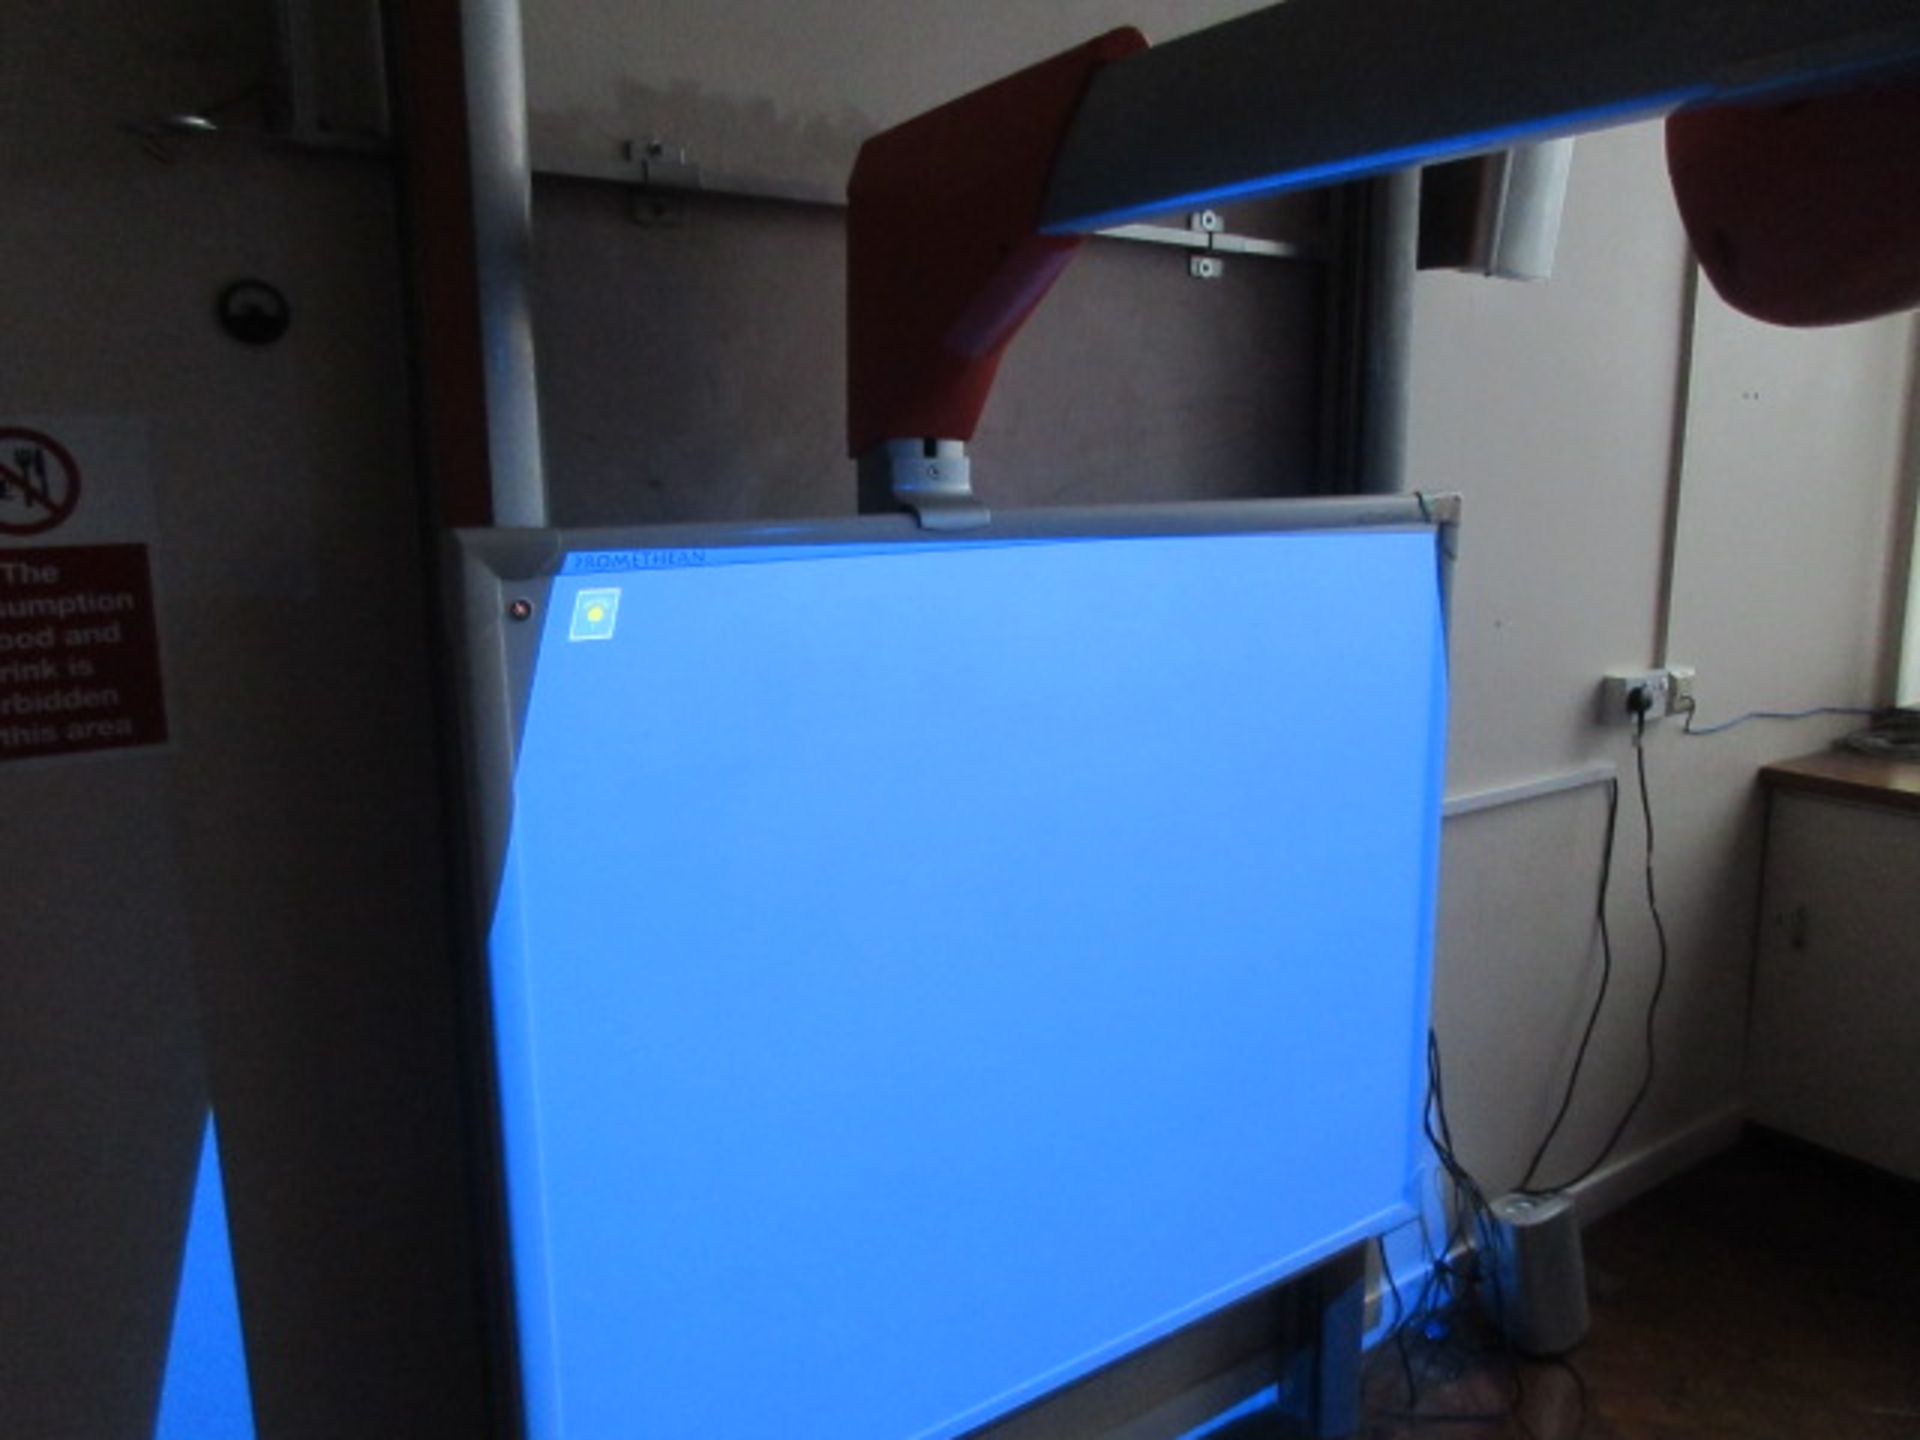 Promethean Activboard Smart Screen with overhead projector, PC & sound modules, wall mounted - Image 3 of 4